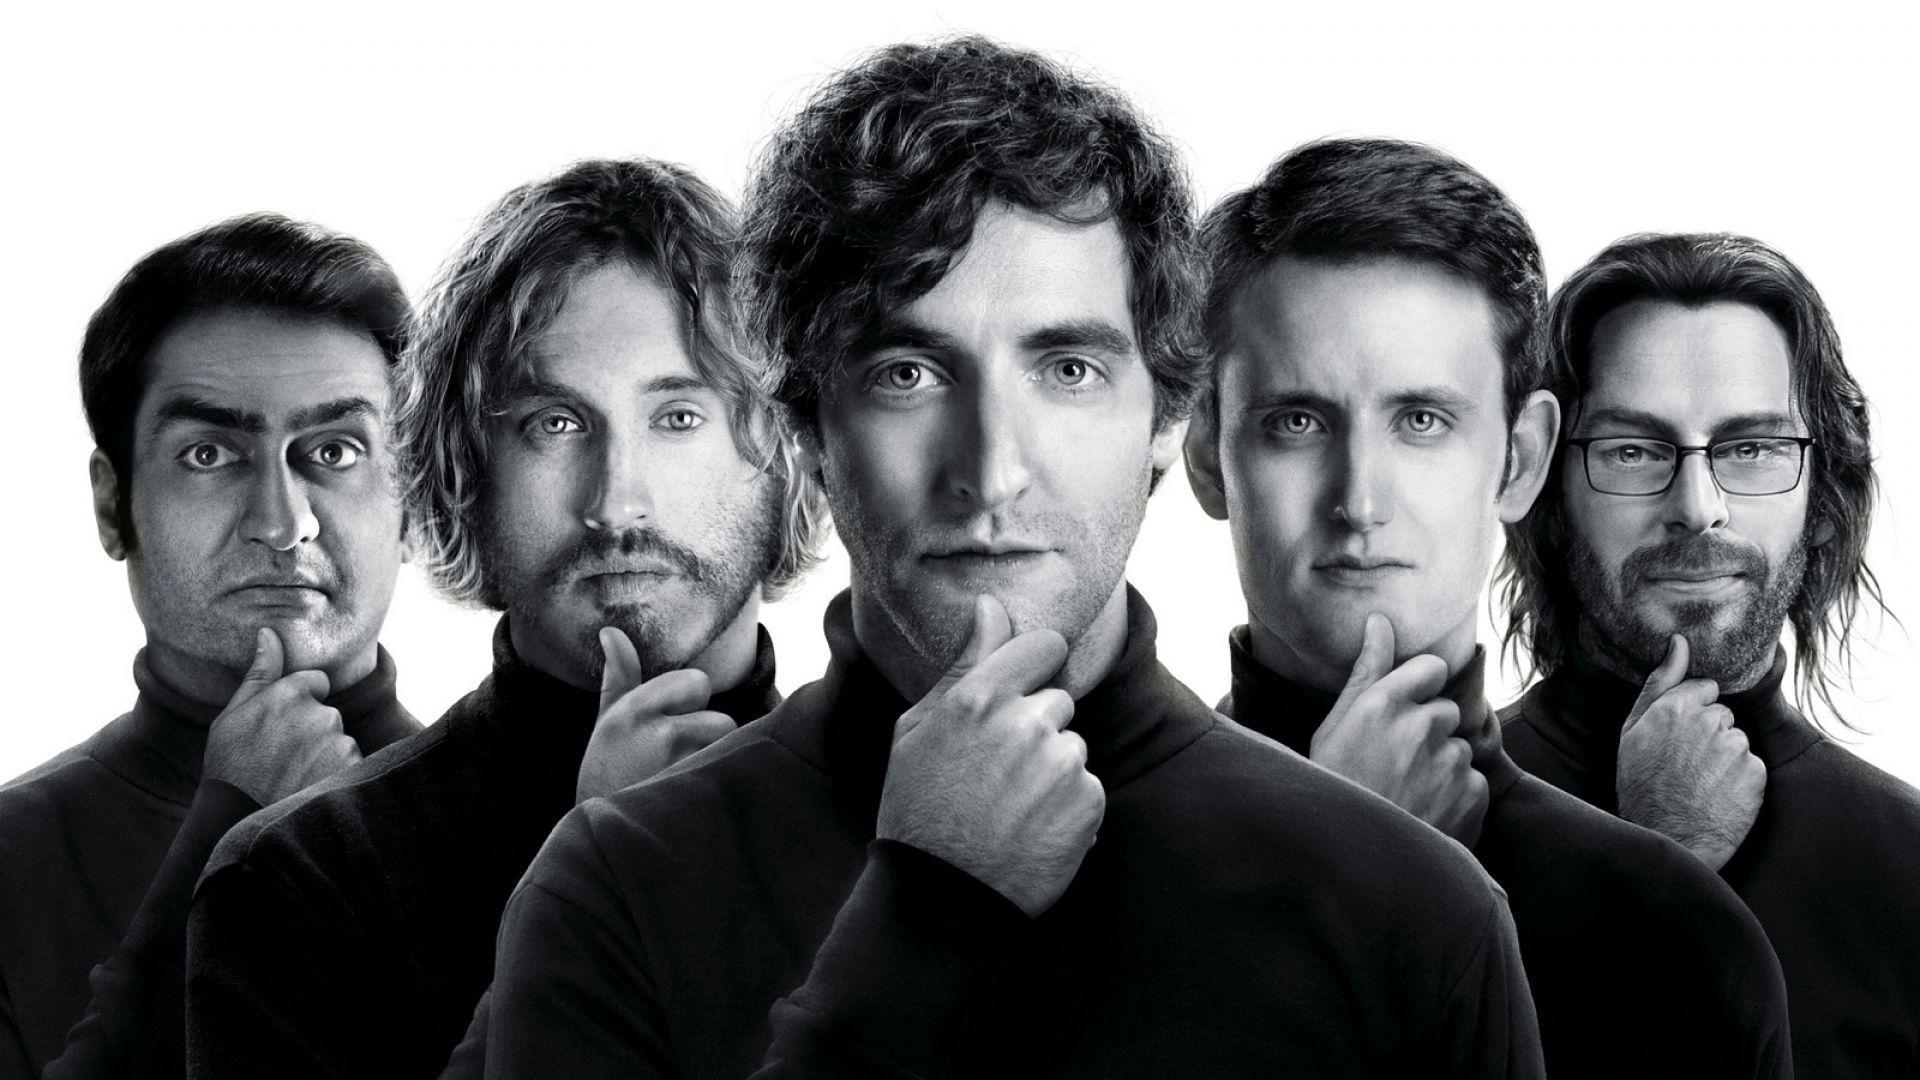 Full HD 1080p Silicon valley Wallpaper HD, Desktop Background